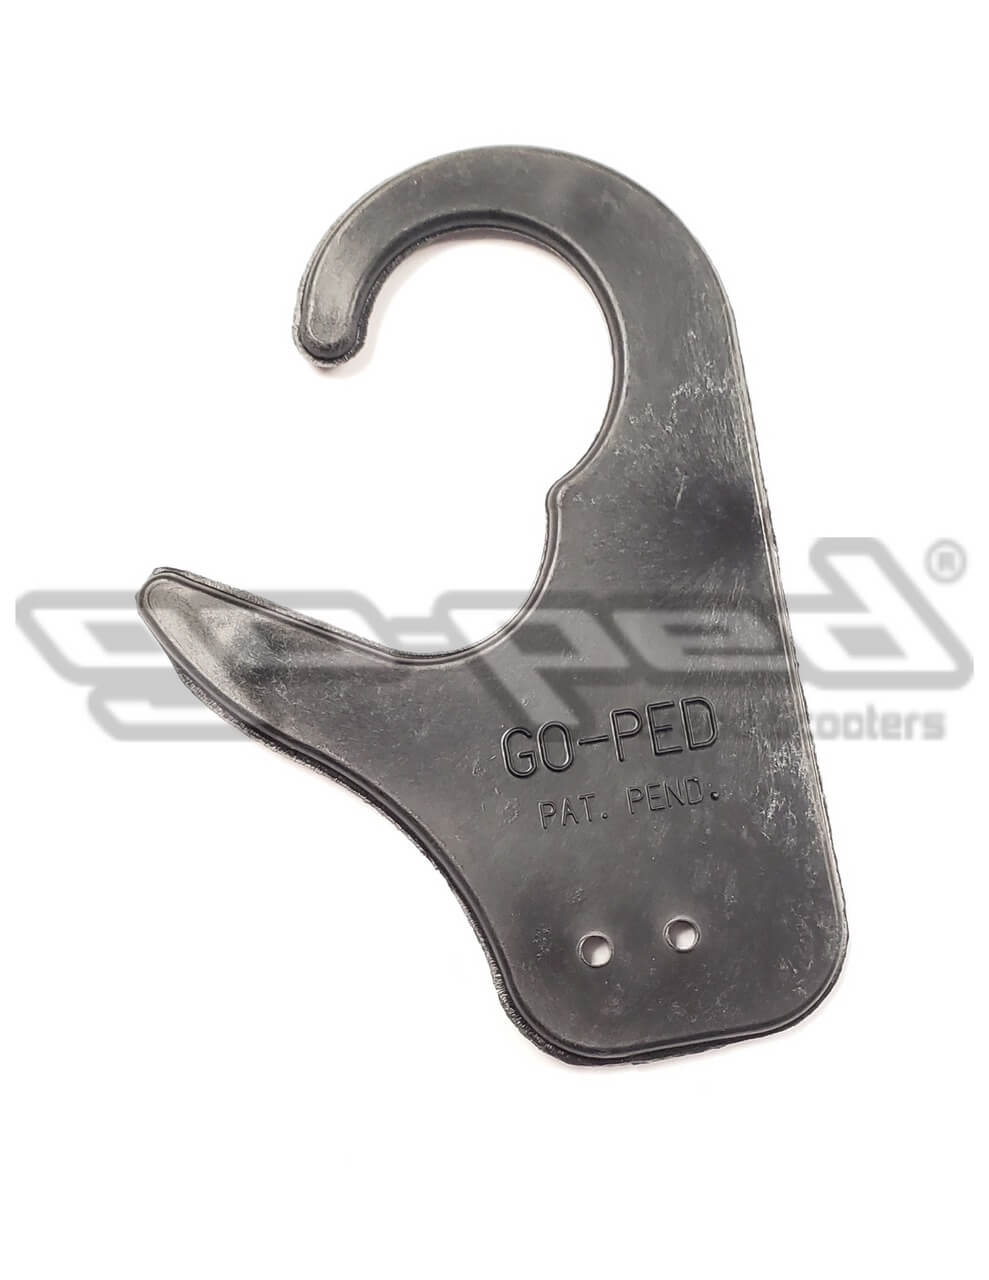 Go-Ped Replacement PLASTIC CARRY LATCH (1005) for Sport Gas Scooter